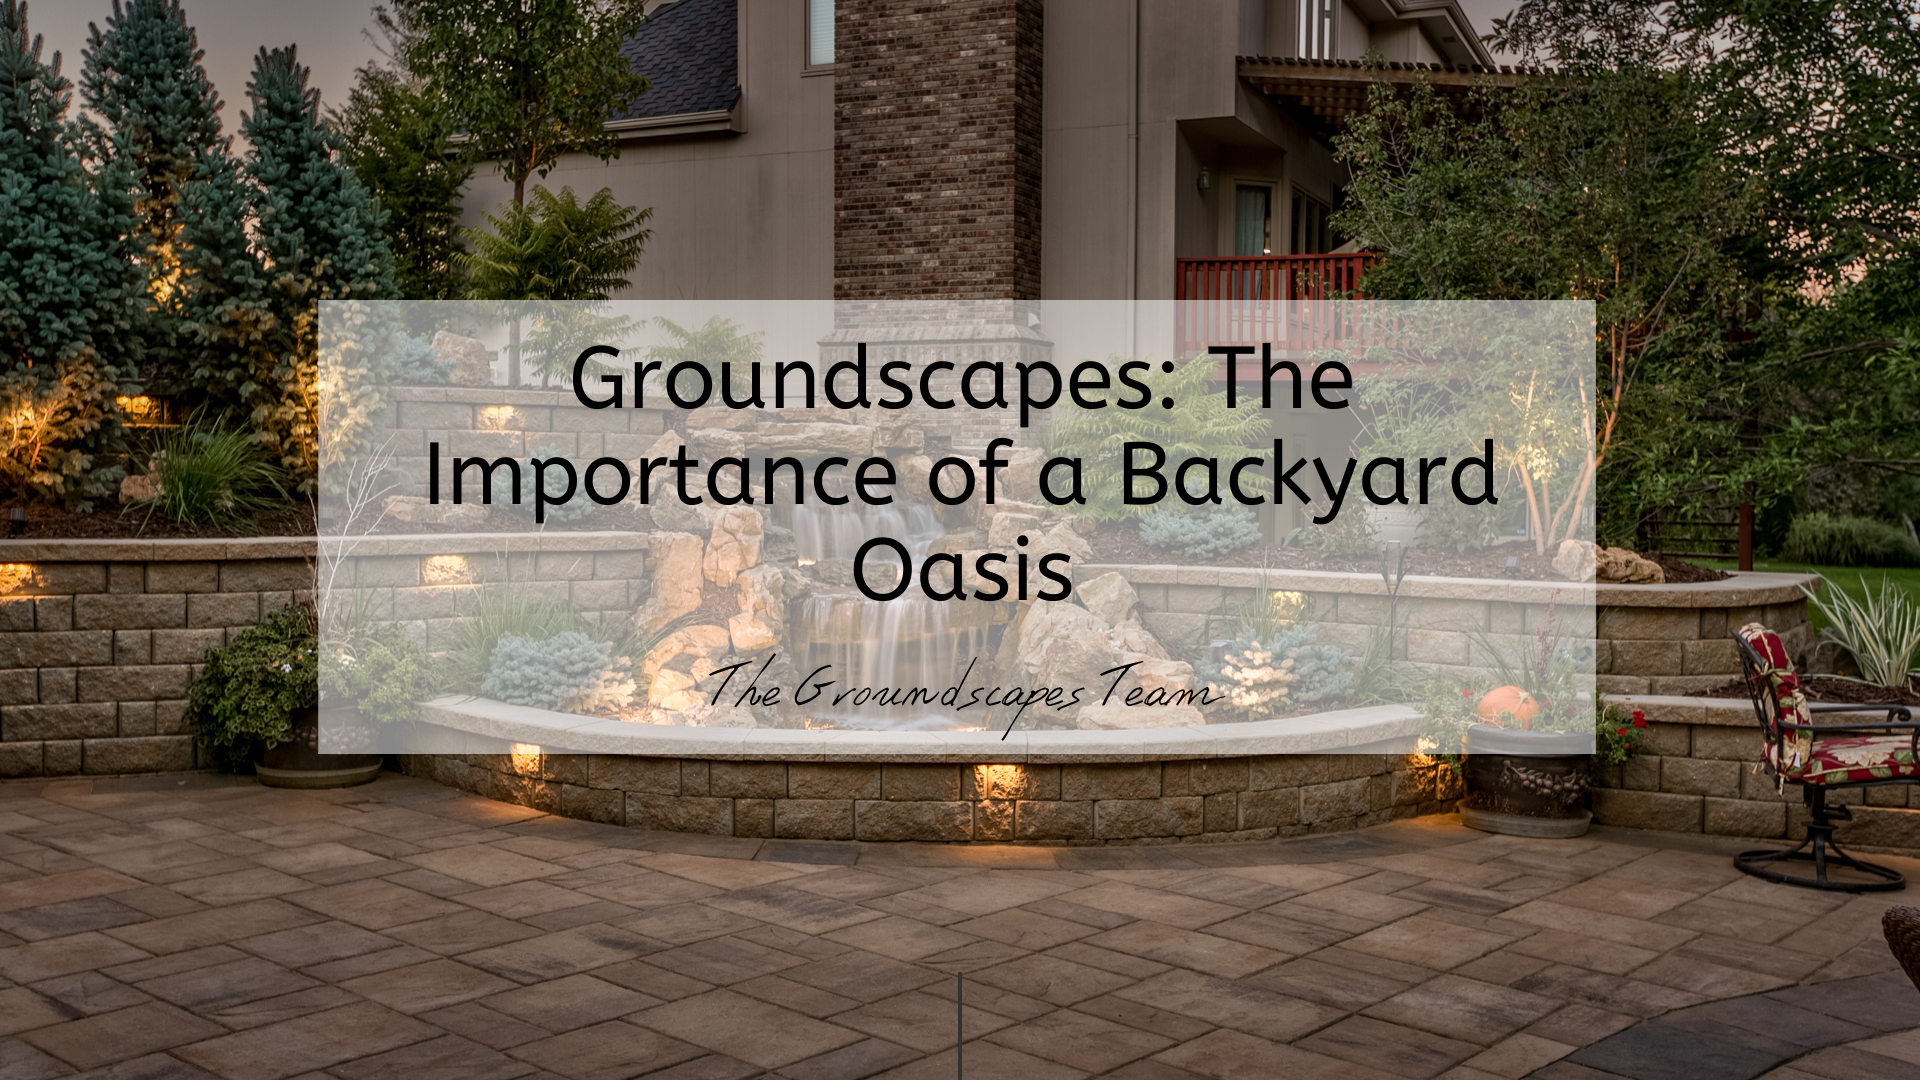 Groundscapes: The Importance of a Backyard Oasis